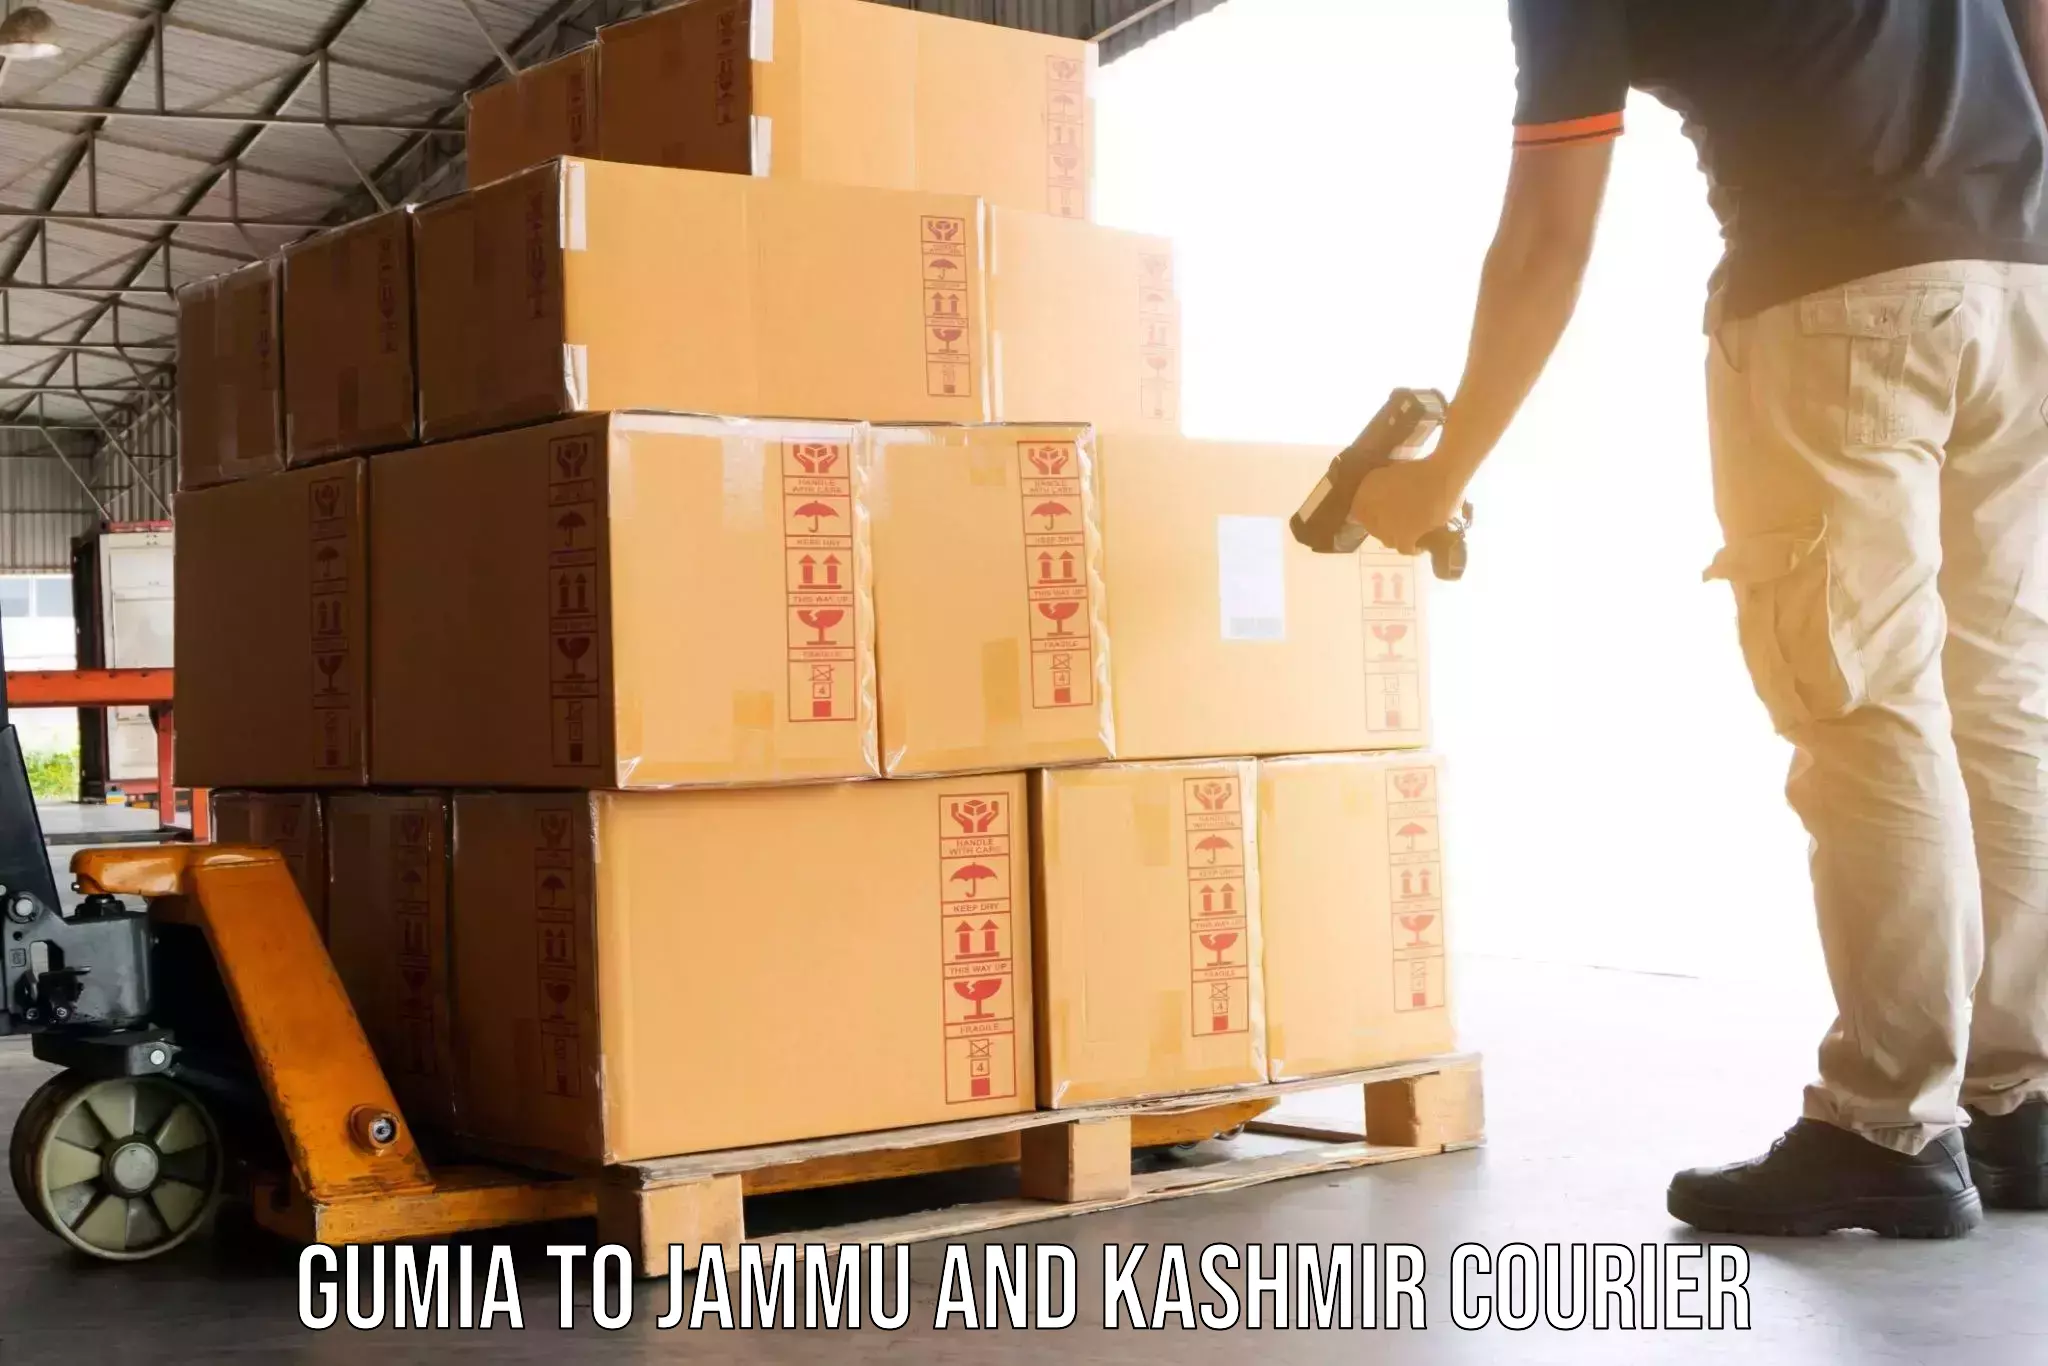 Comprehensive moving services Gumia to University of Jammu